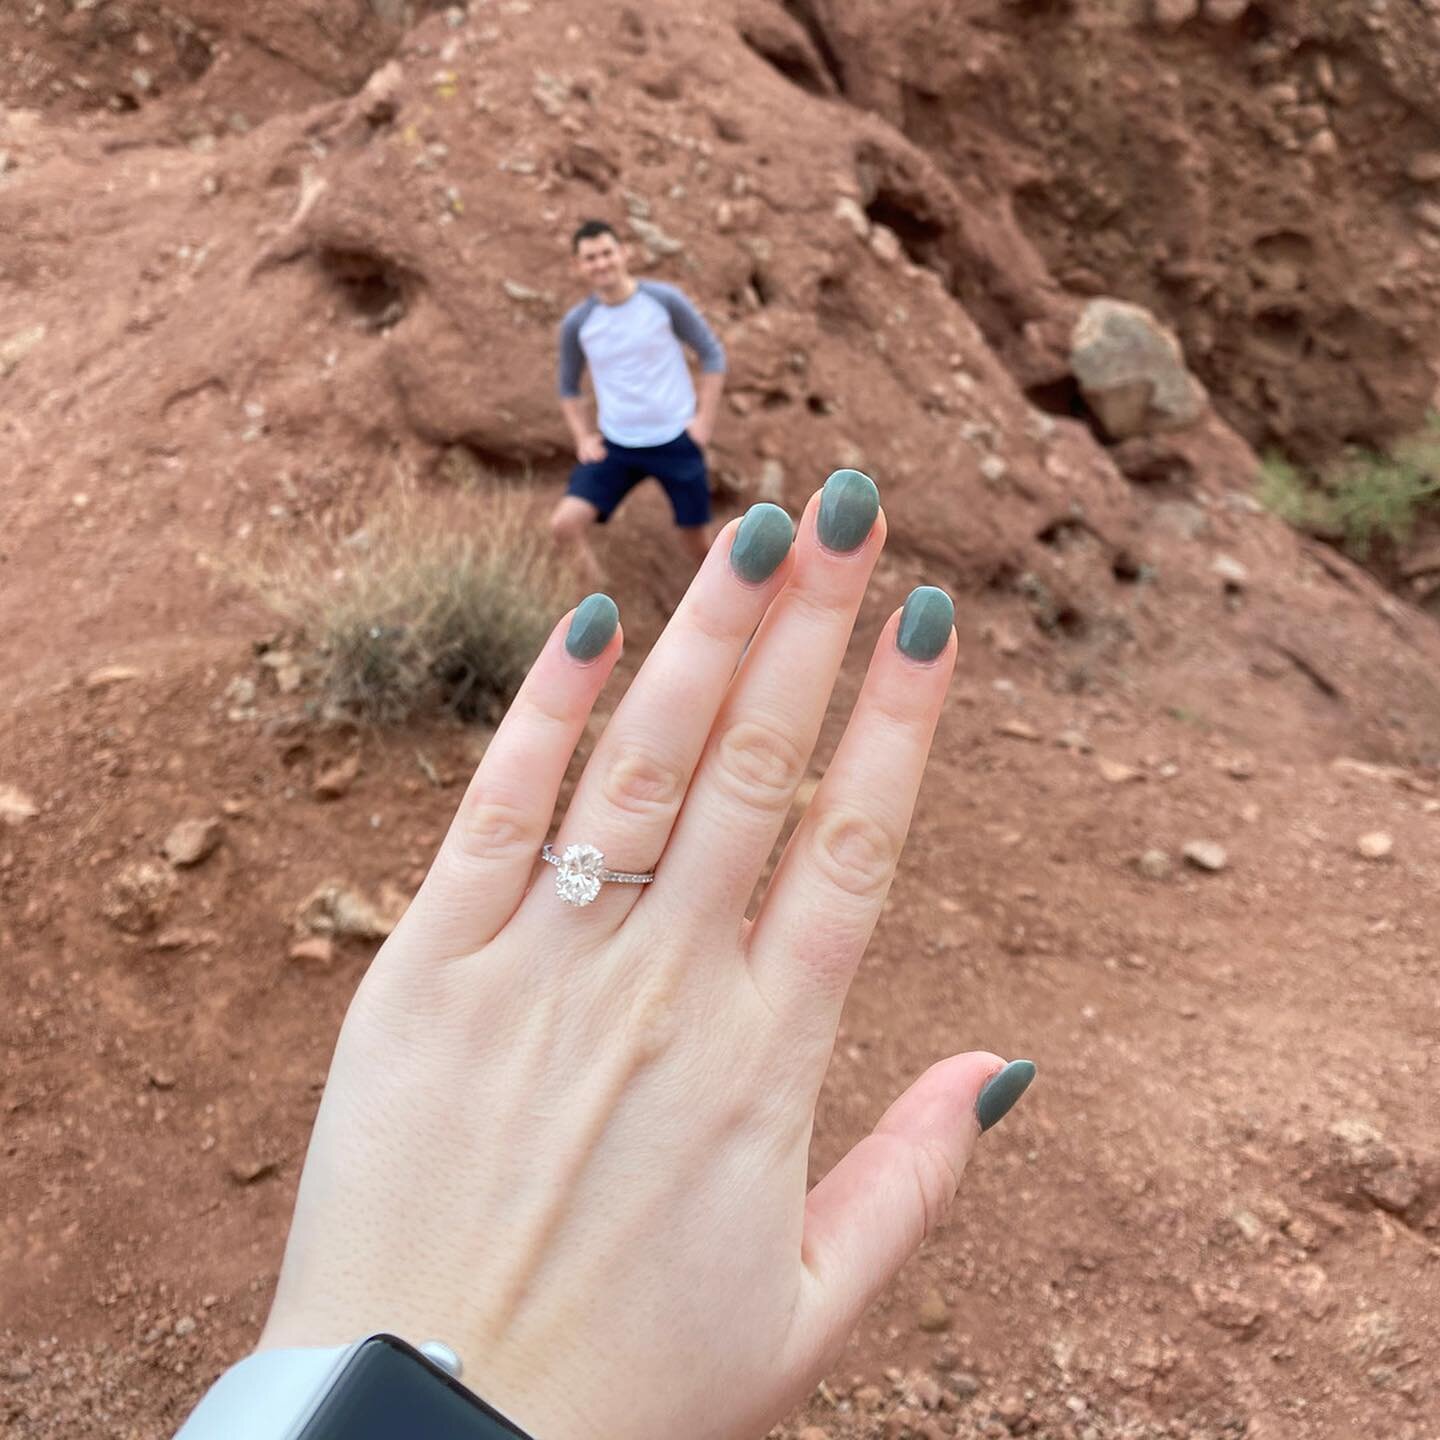 &quot;We like to collect rocks from places we&rsquo;ve traveled as a cheap souvenir, so we decided we would choose one from the highest peak we climbed in Arizona that day. Once we arrived at the top, Kendall presented a completely different kind of 